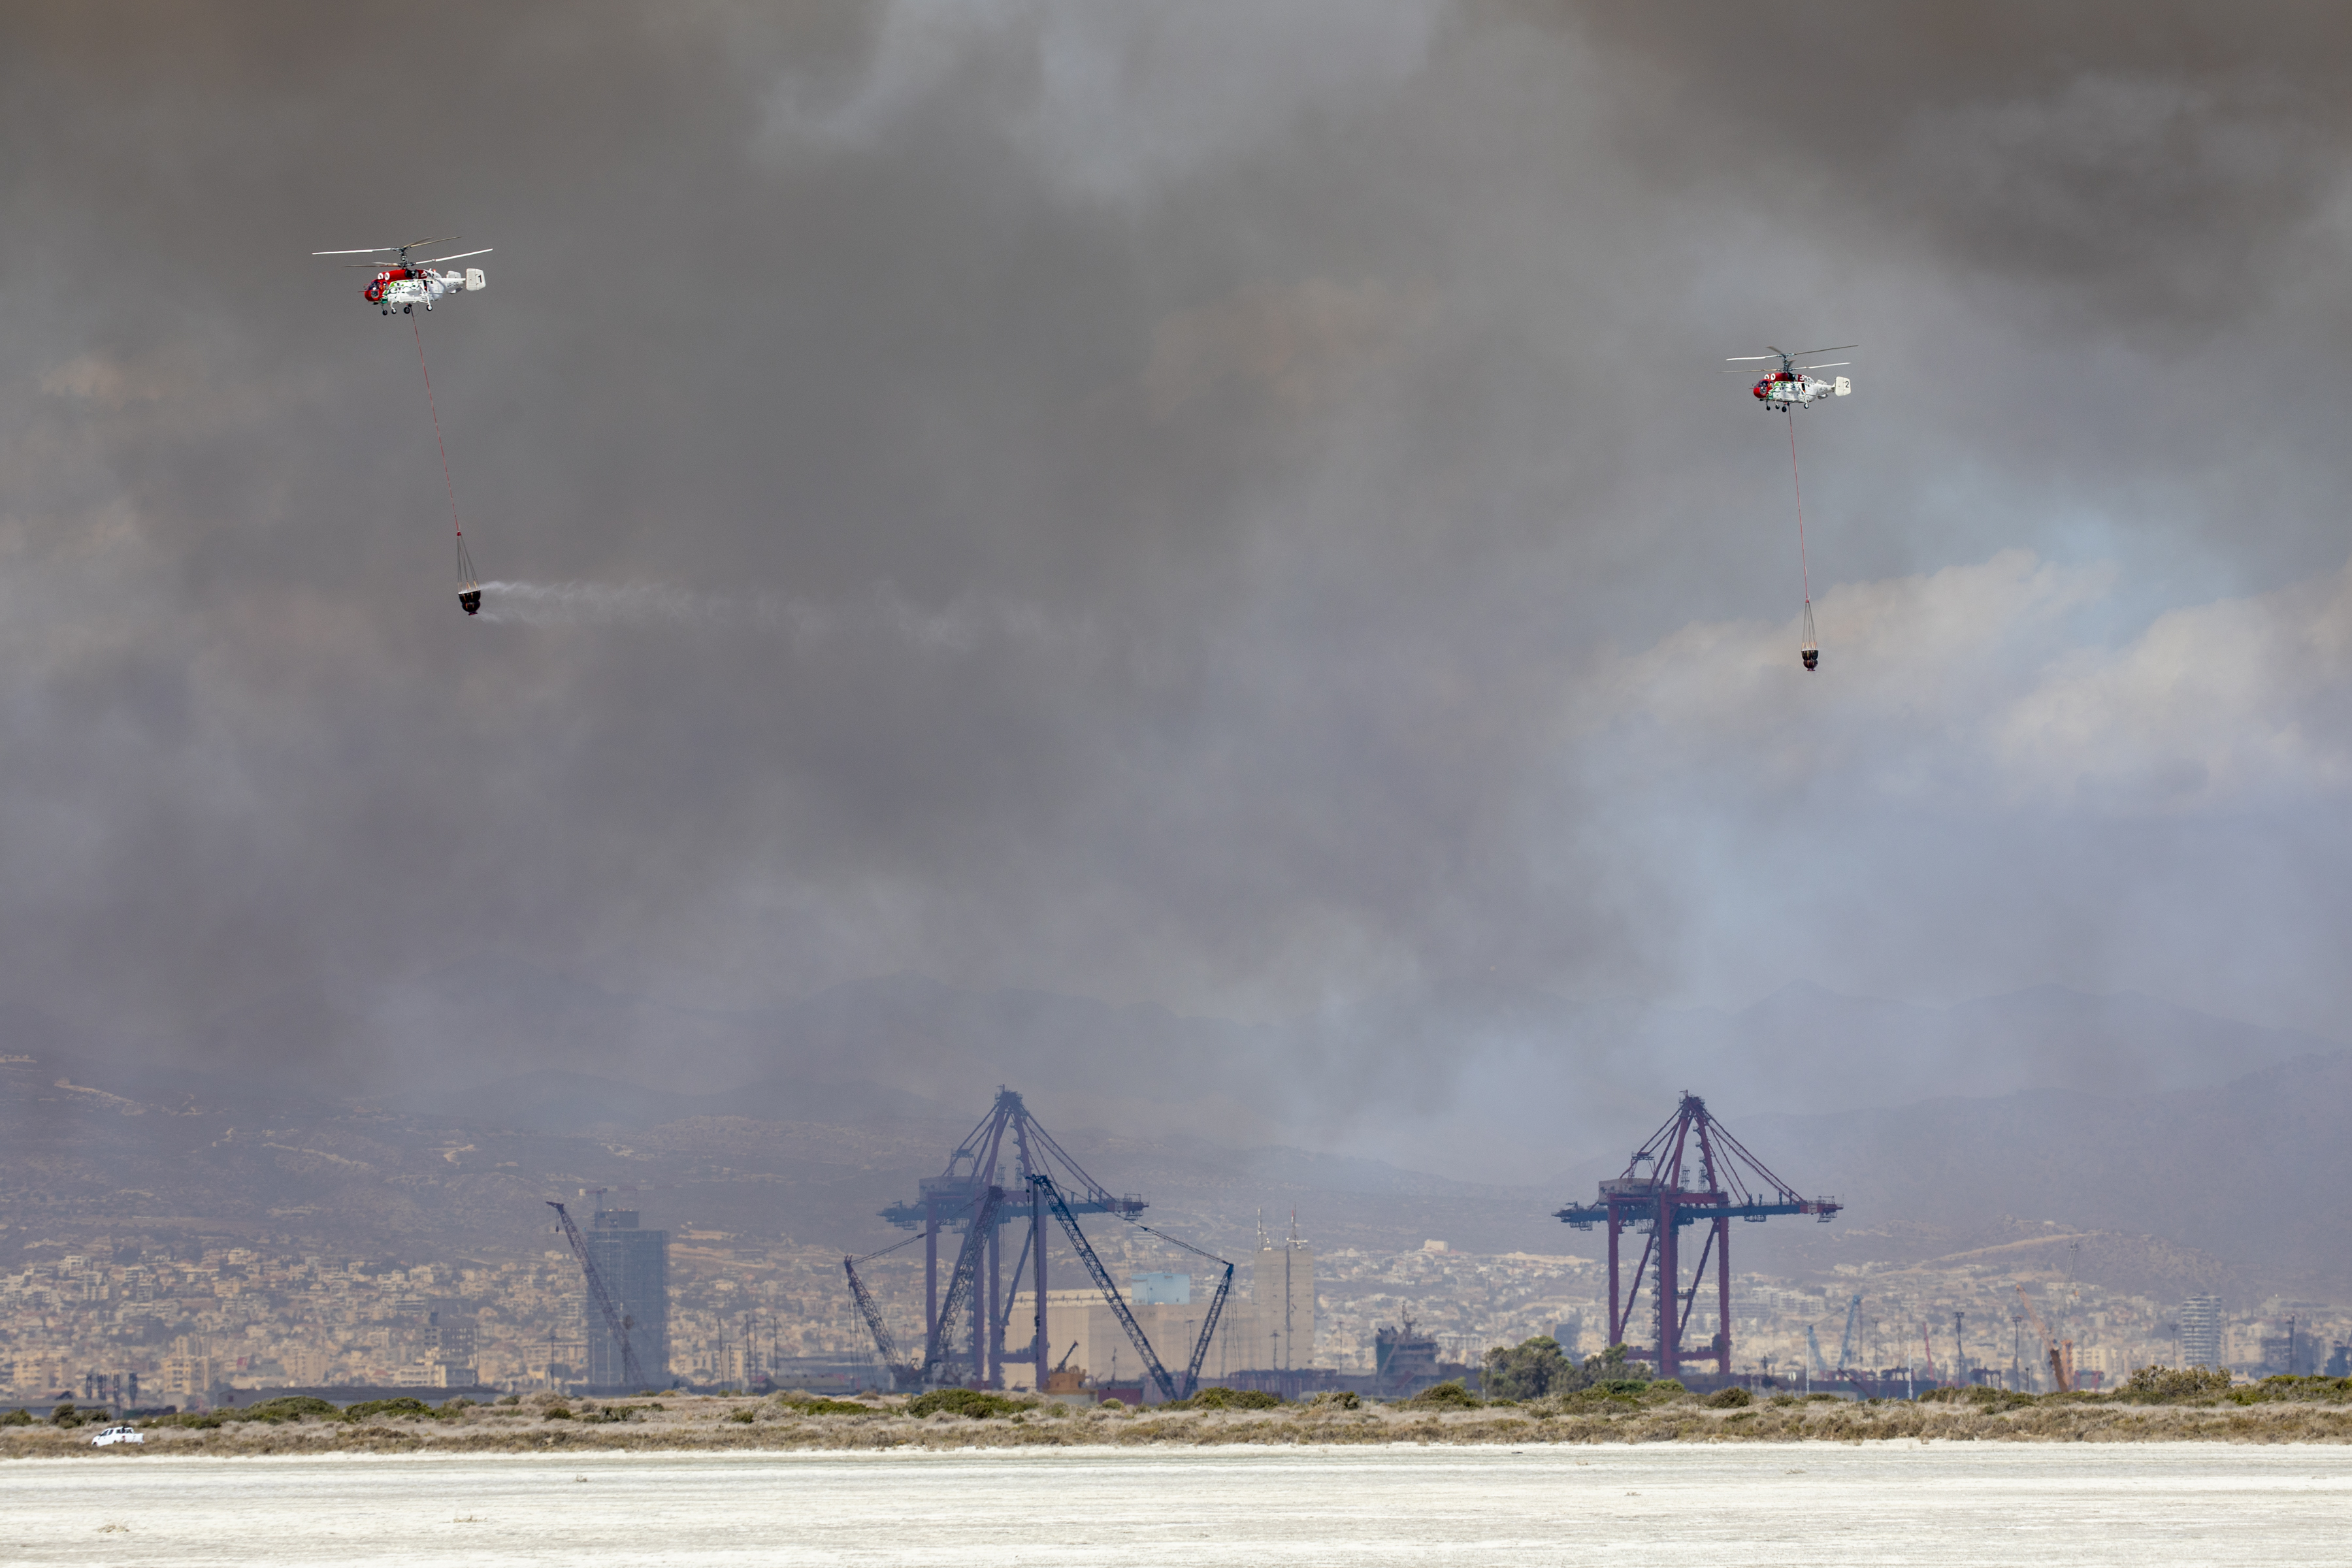 Image shows two helicopters dropping water from under sling